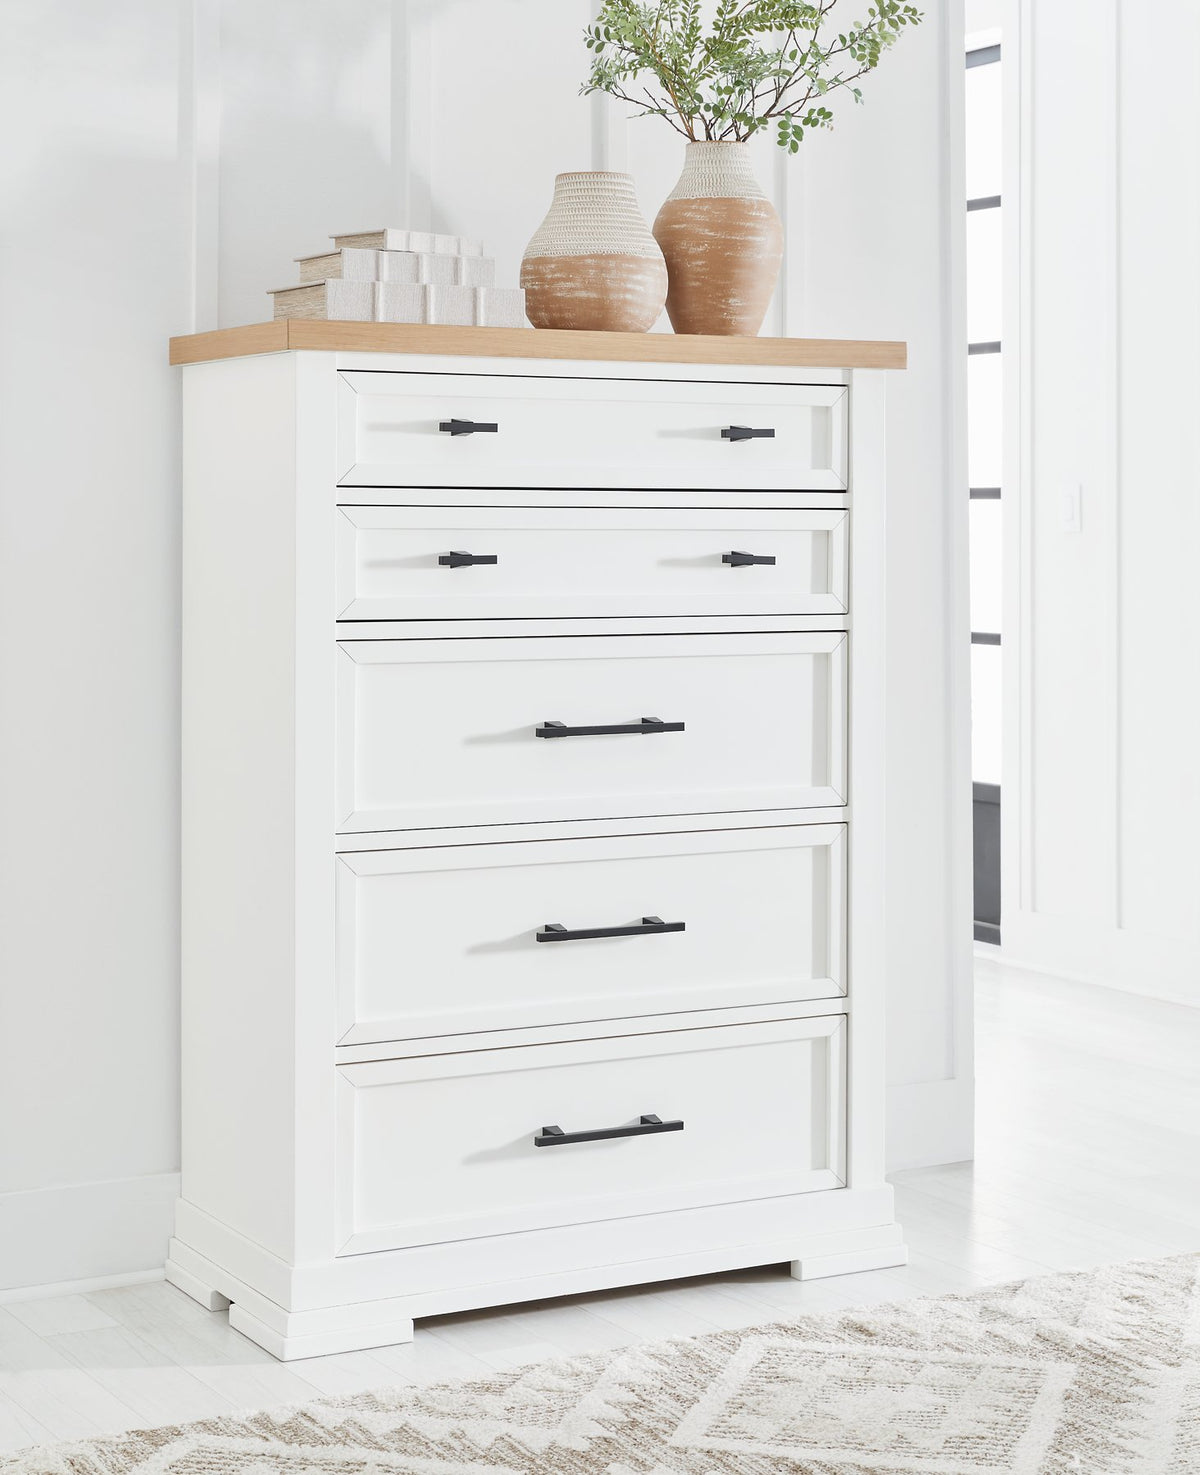 Ashbryn Chest of Drawers Ashbryn Chest of Drawers Half Price Furniture